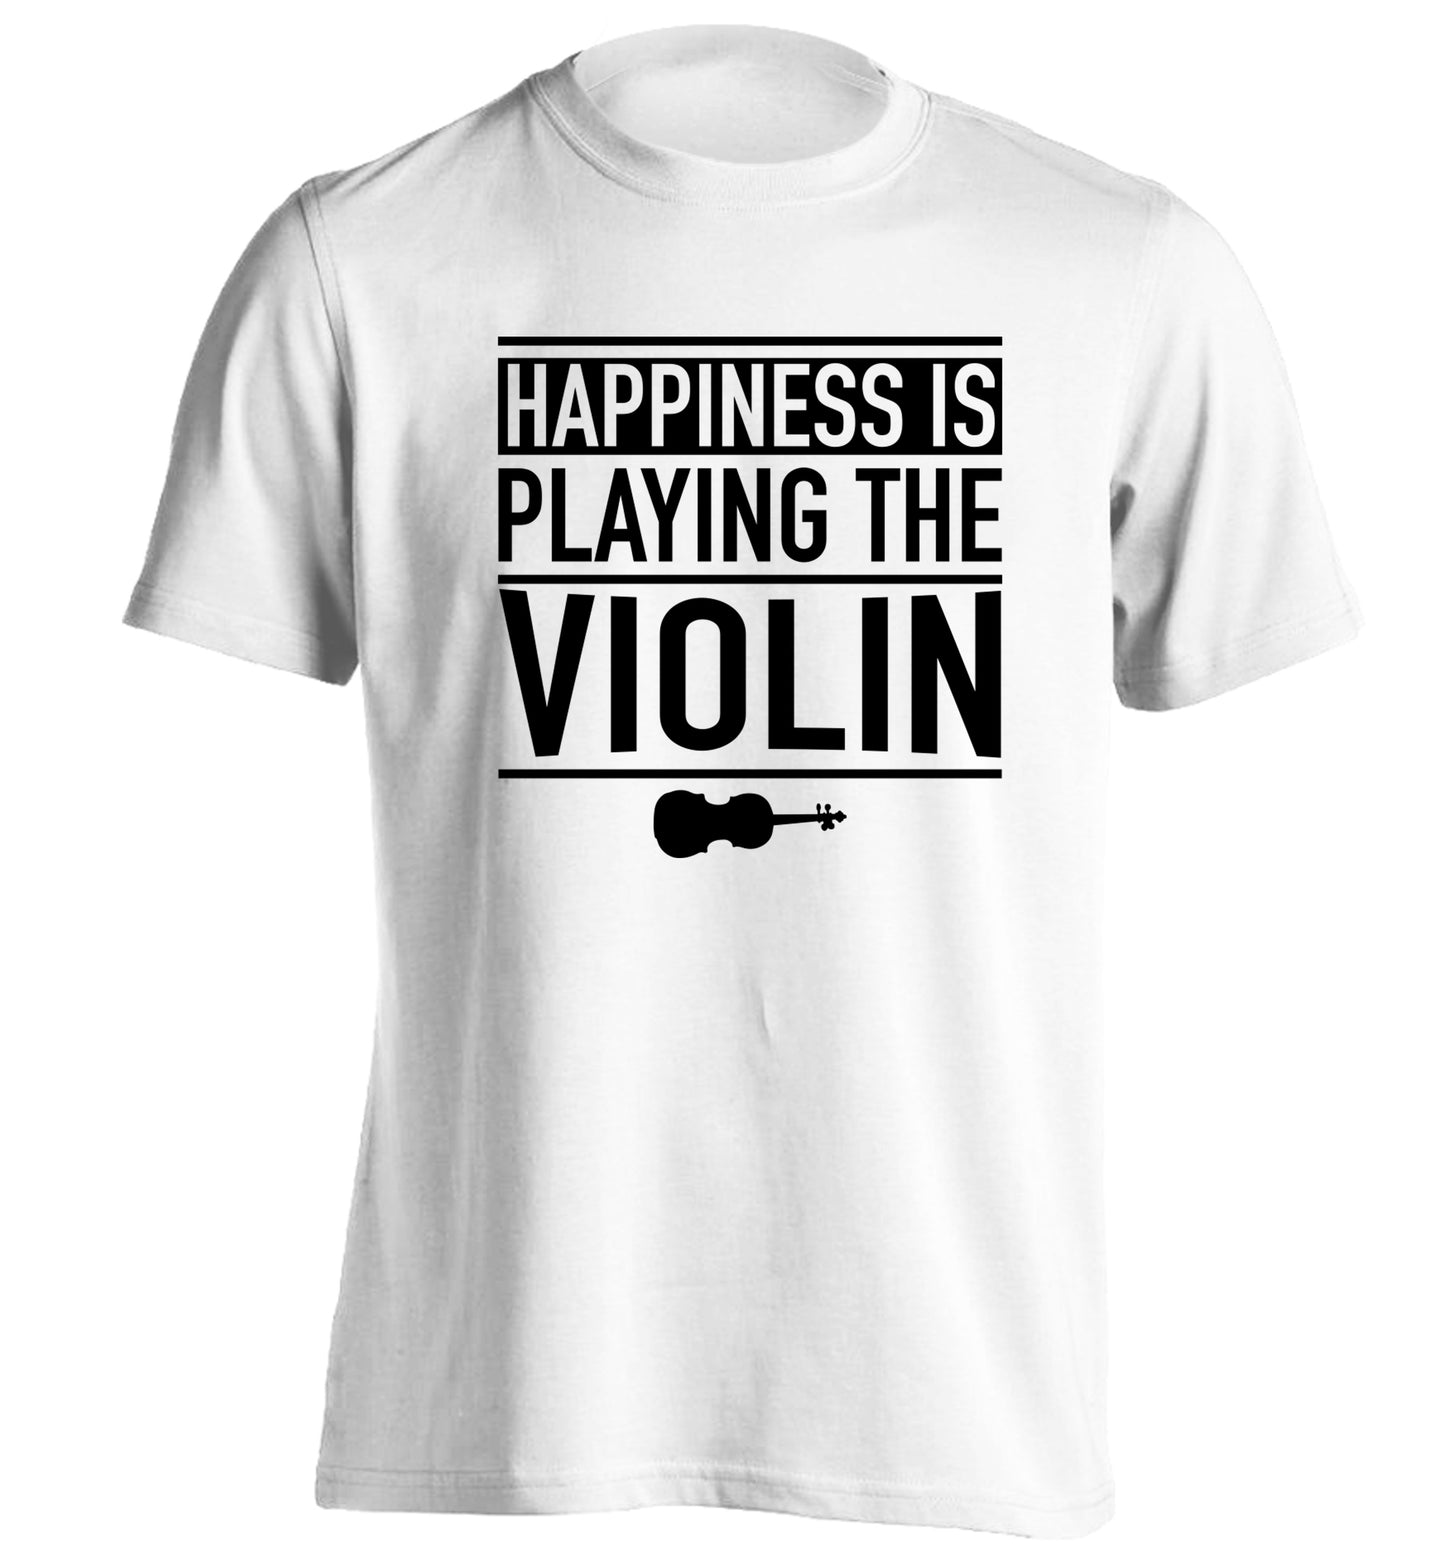 Happiness is playing the violin adults unisex white Tshirt 2XL